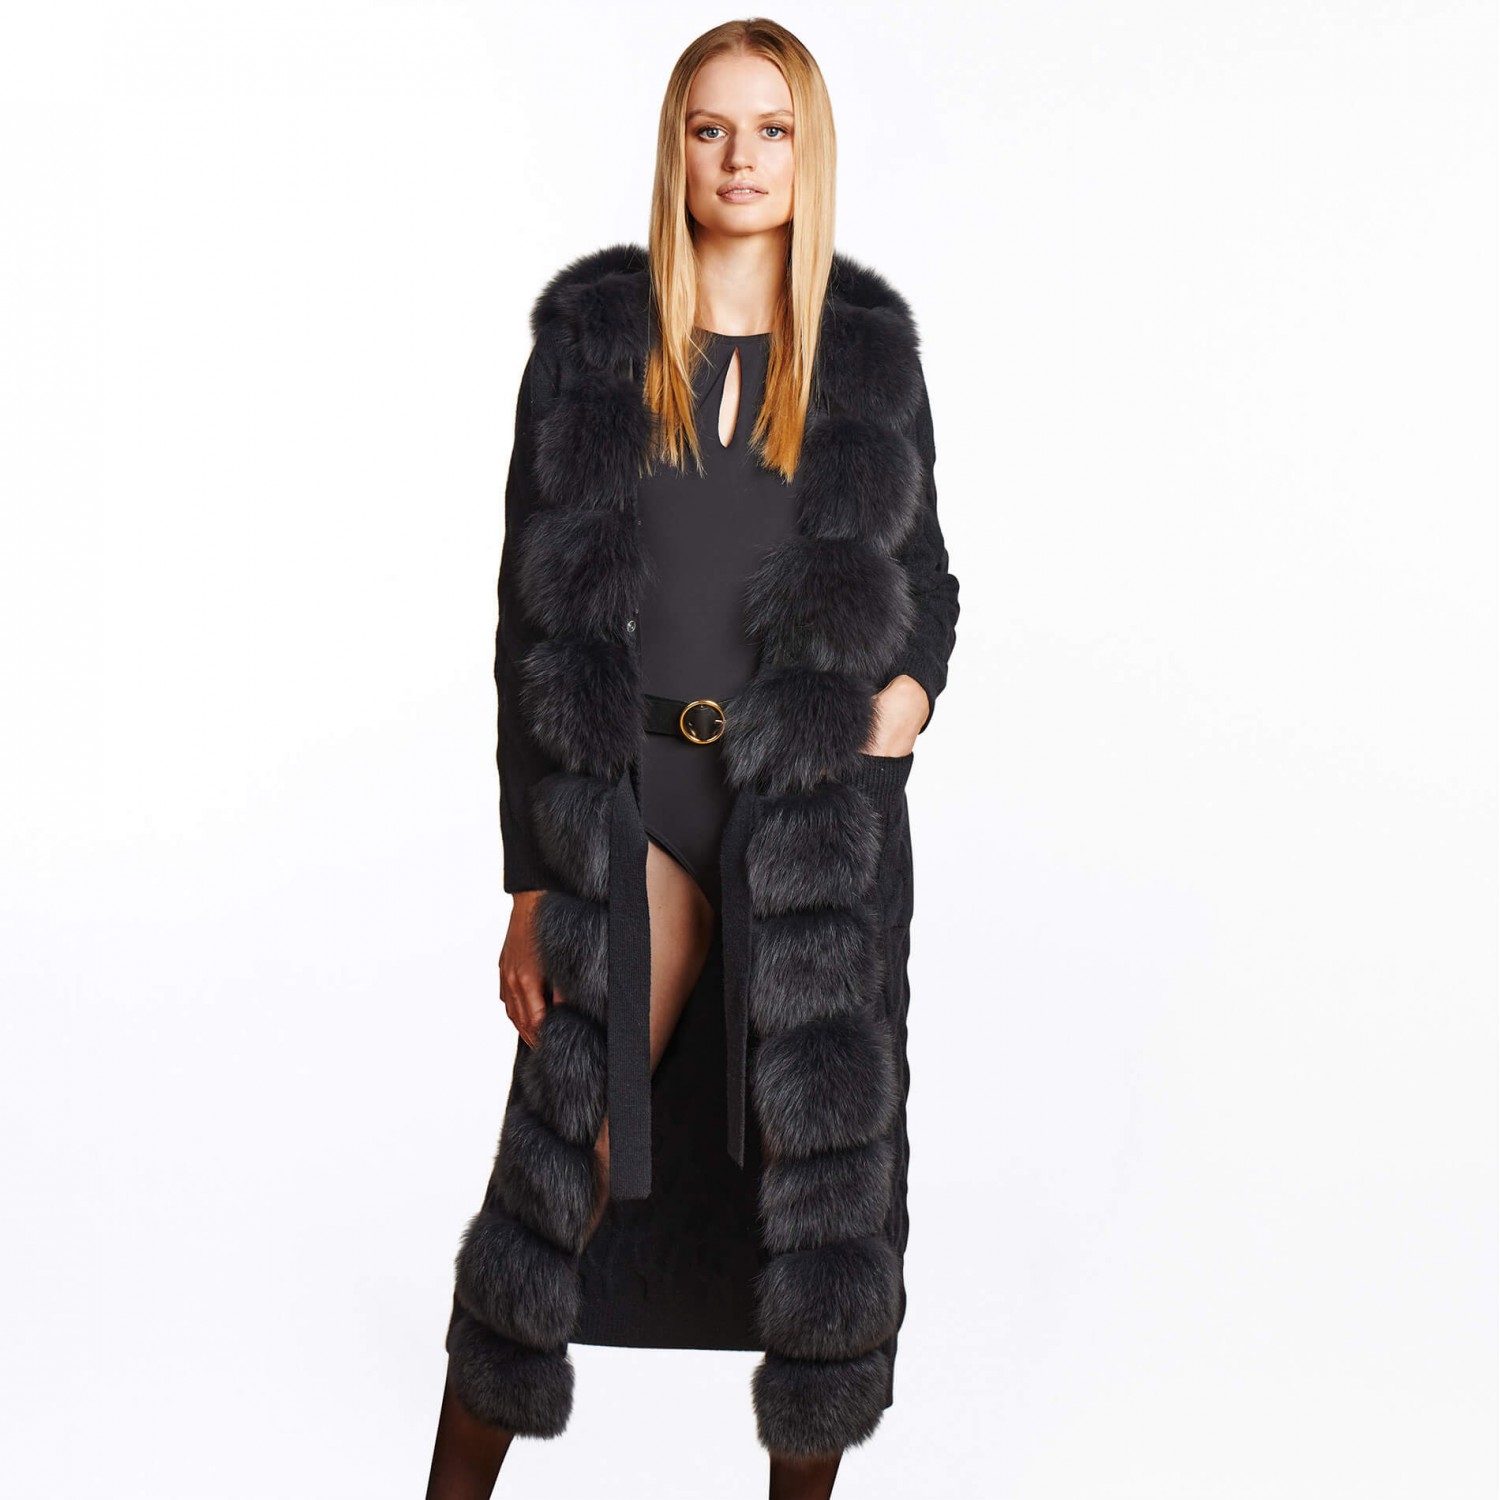 Coat with real fur